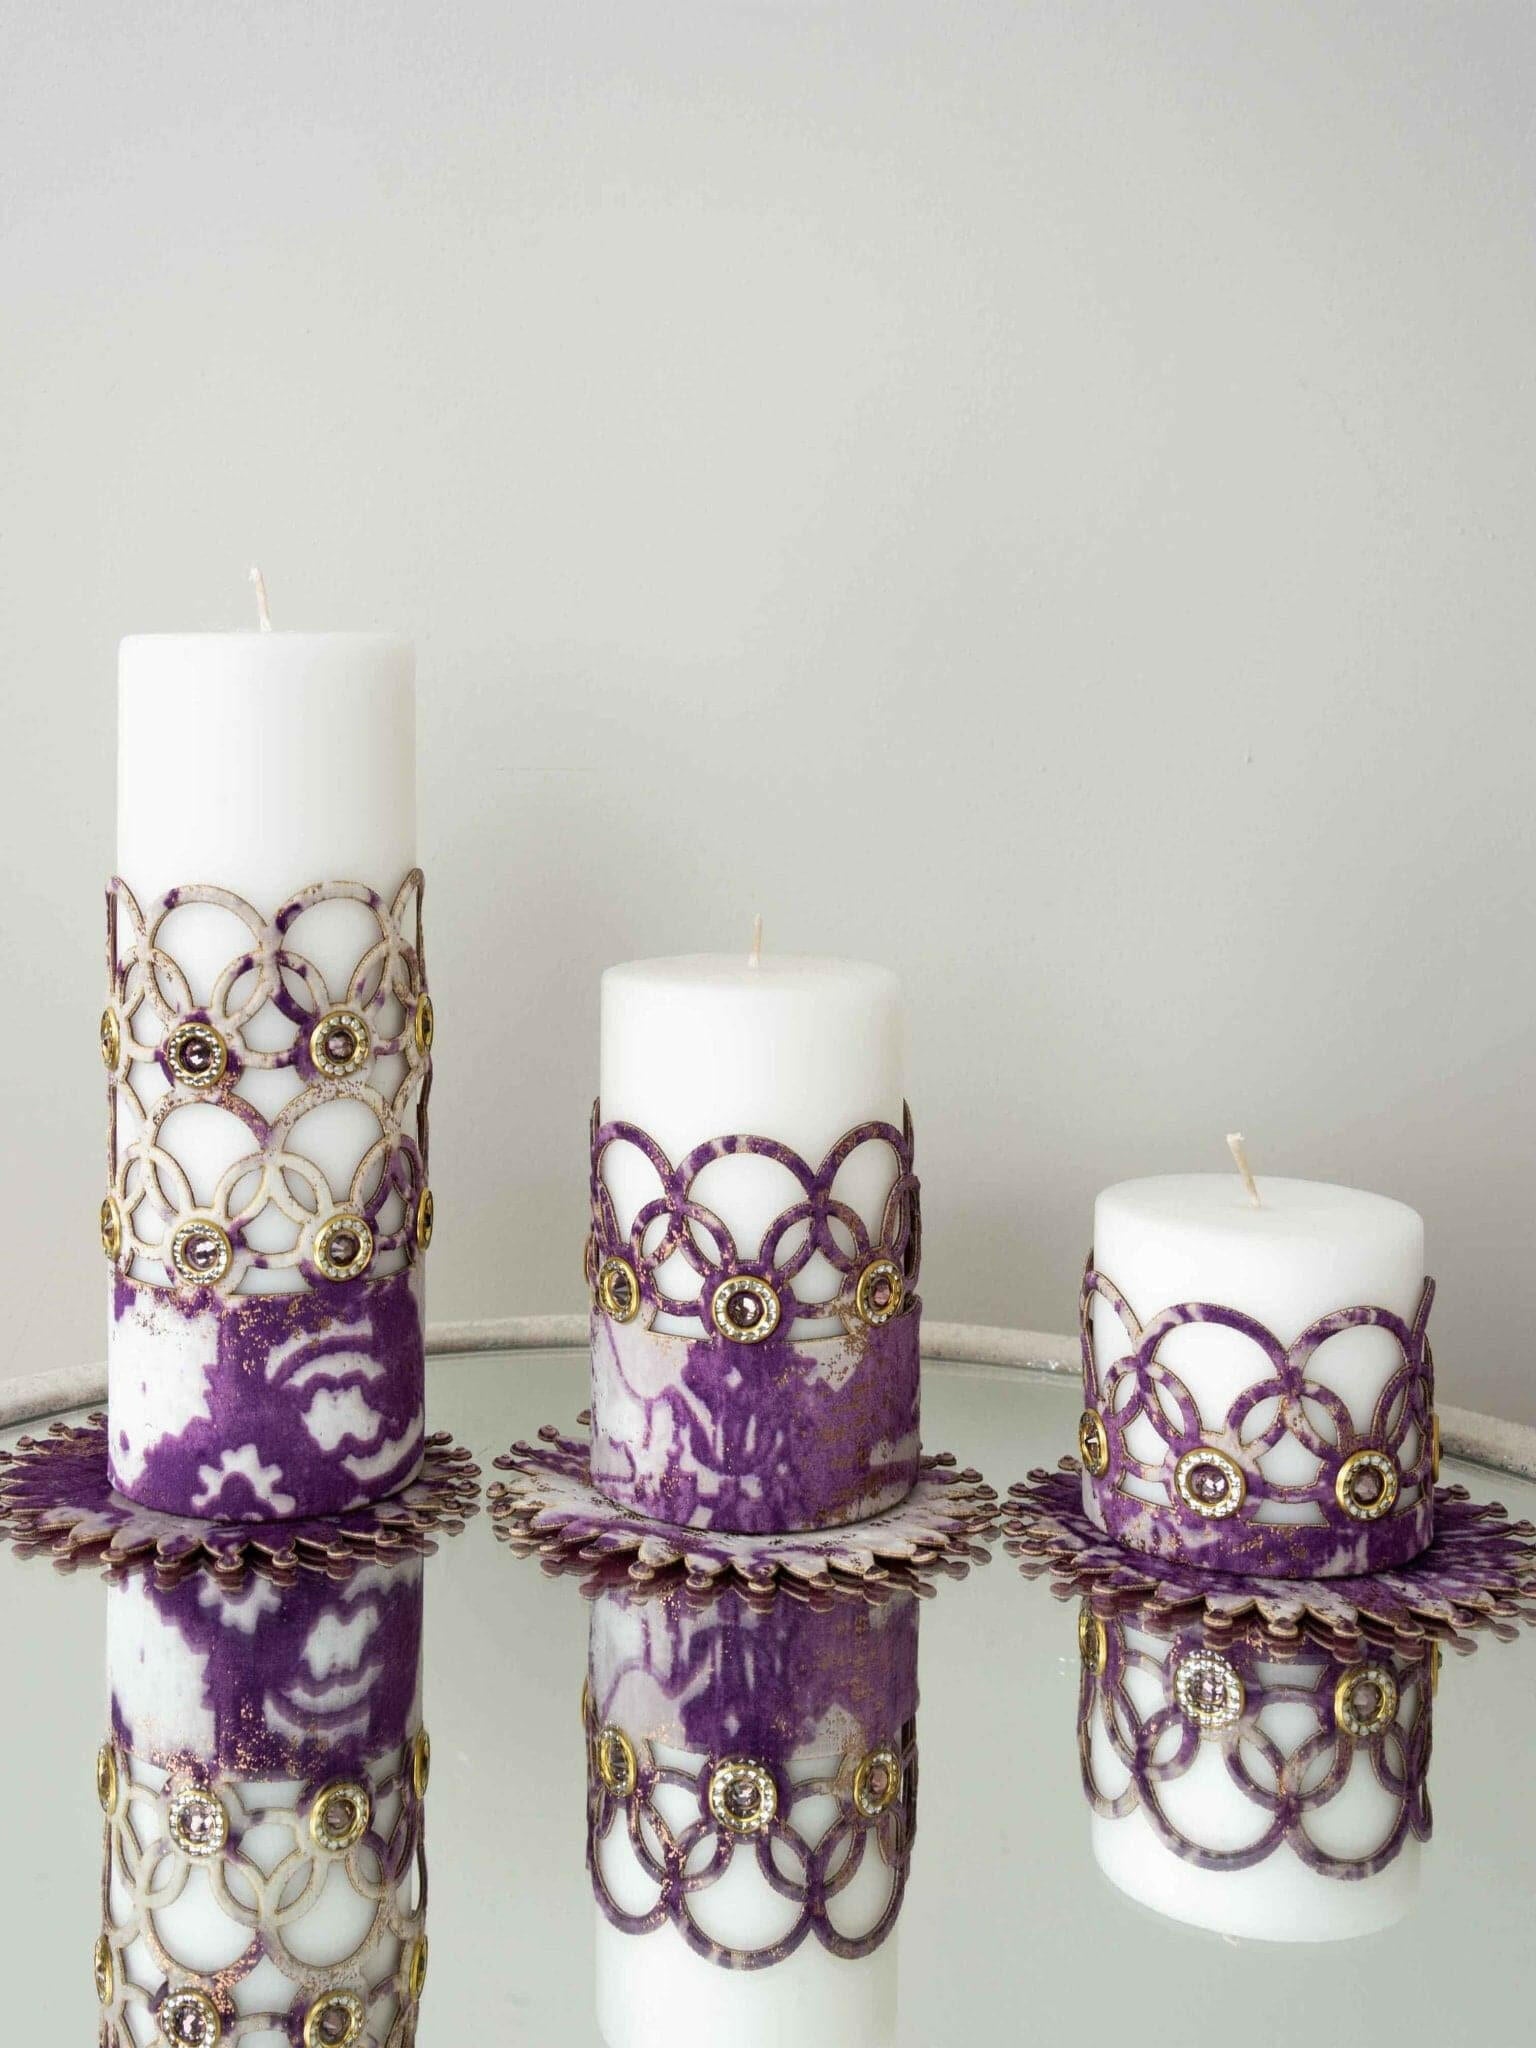 Zerre Purple Copper Luxury Candle Set of 3, Leather Circular Pattern, Decorative Glamorous Candles by Creative Home,CS-CH-ZRRE-PurCop